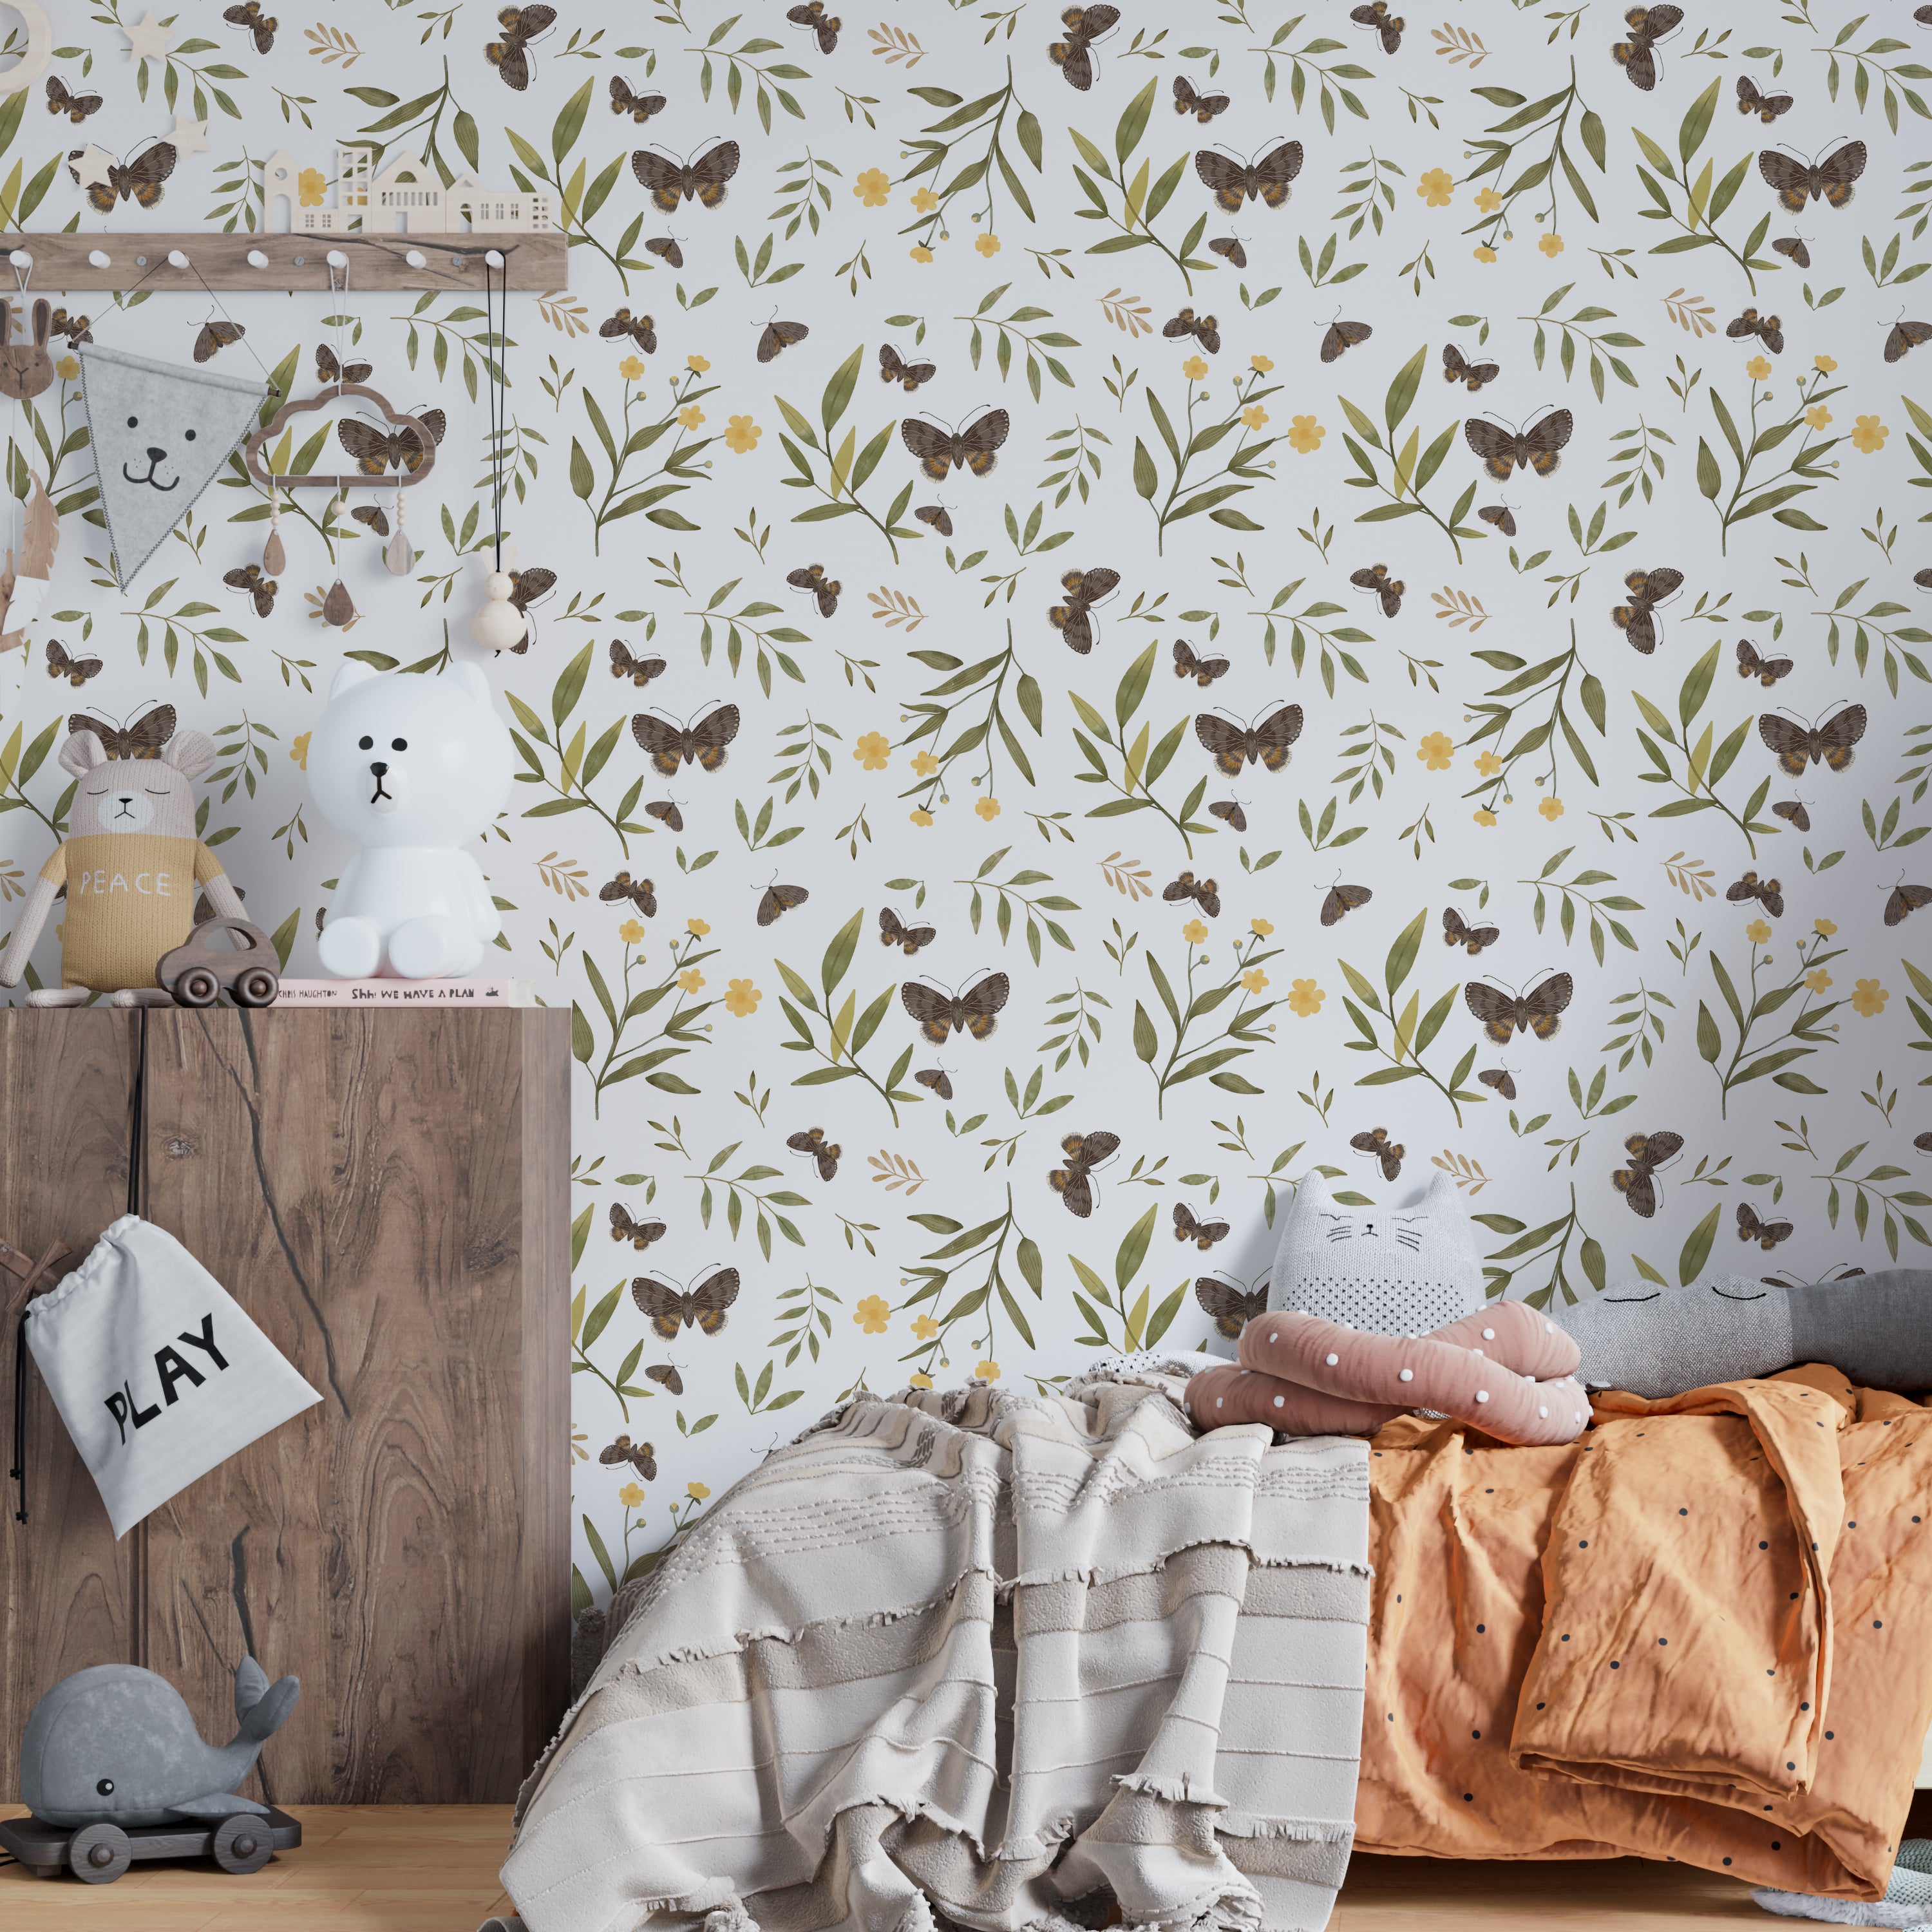 Children's room adorned with Forest Moth Wallpaper, showing a vibrant pattern of moths, leaves, and flowers that creates a stimulating and educational environment. The room is equipped with soft toys and playful decor, ideal for a nurturing and imaginative space